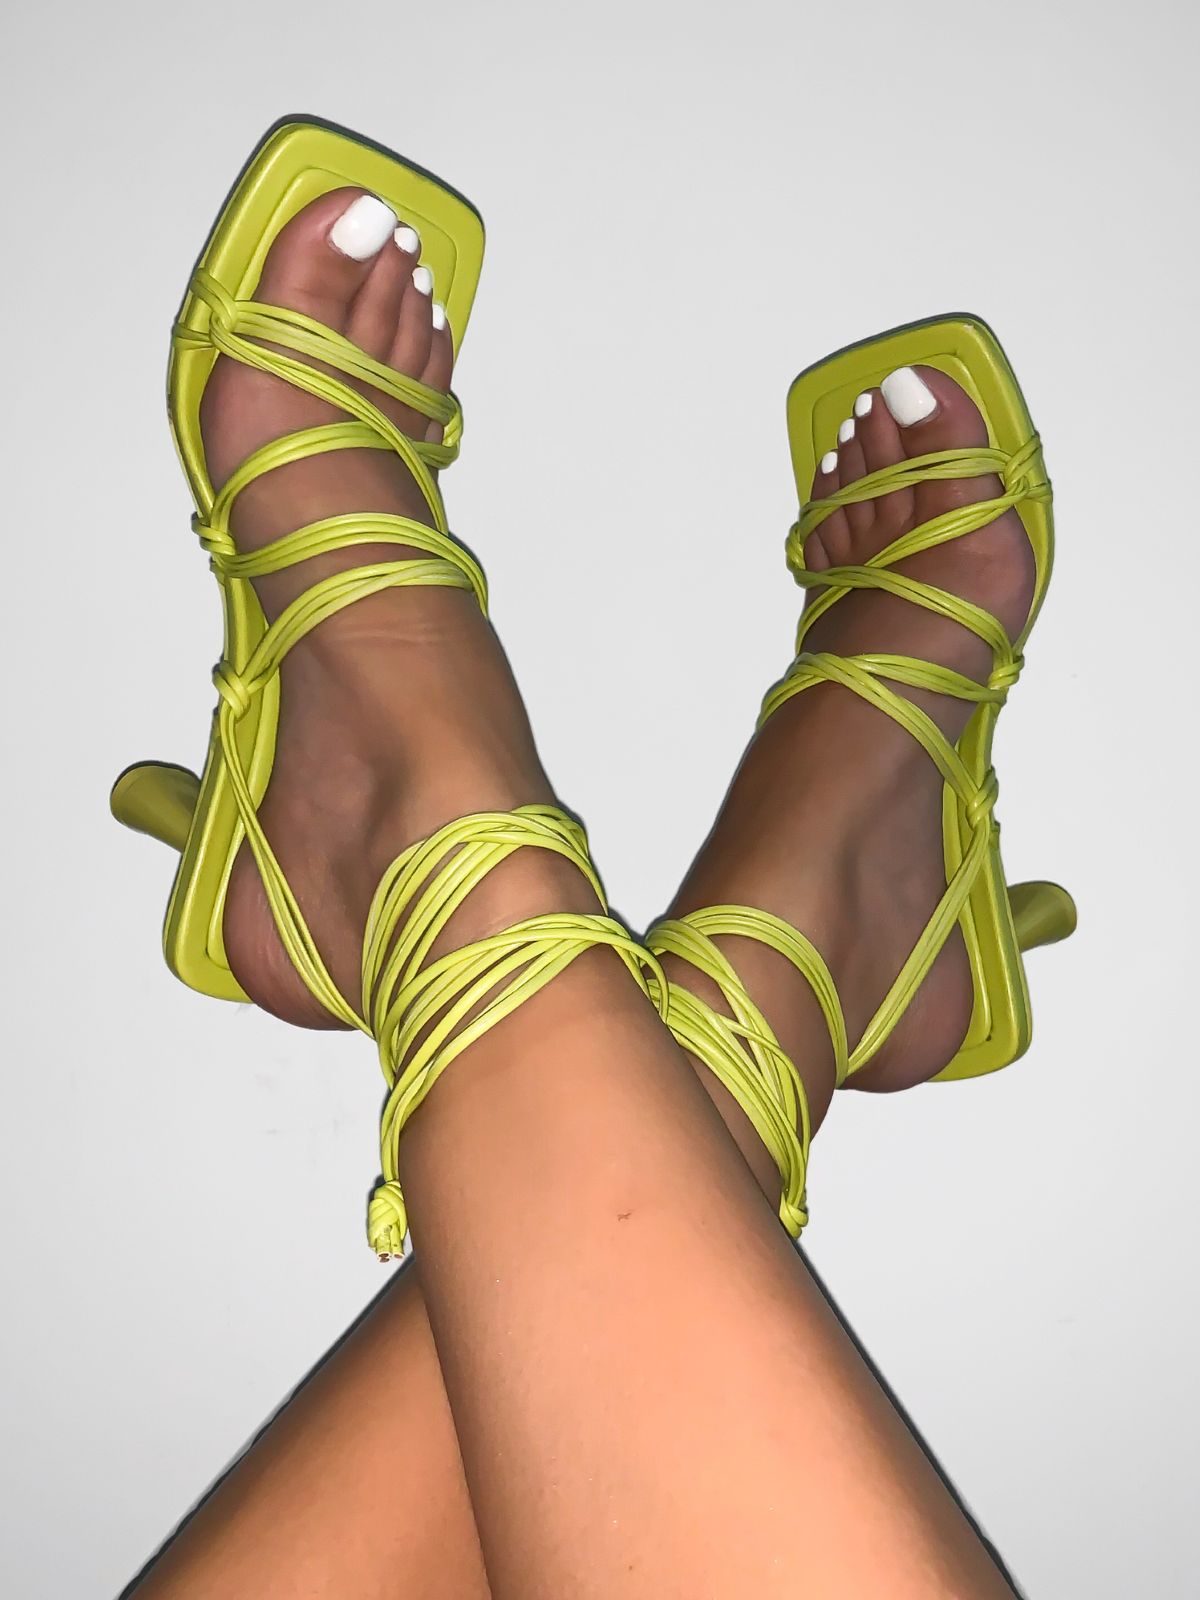 Sandals High Heels Strappy - Neon Yellow Green Lime- size 6 | eBay